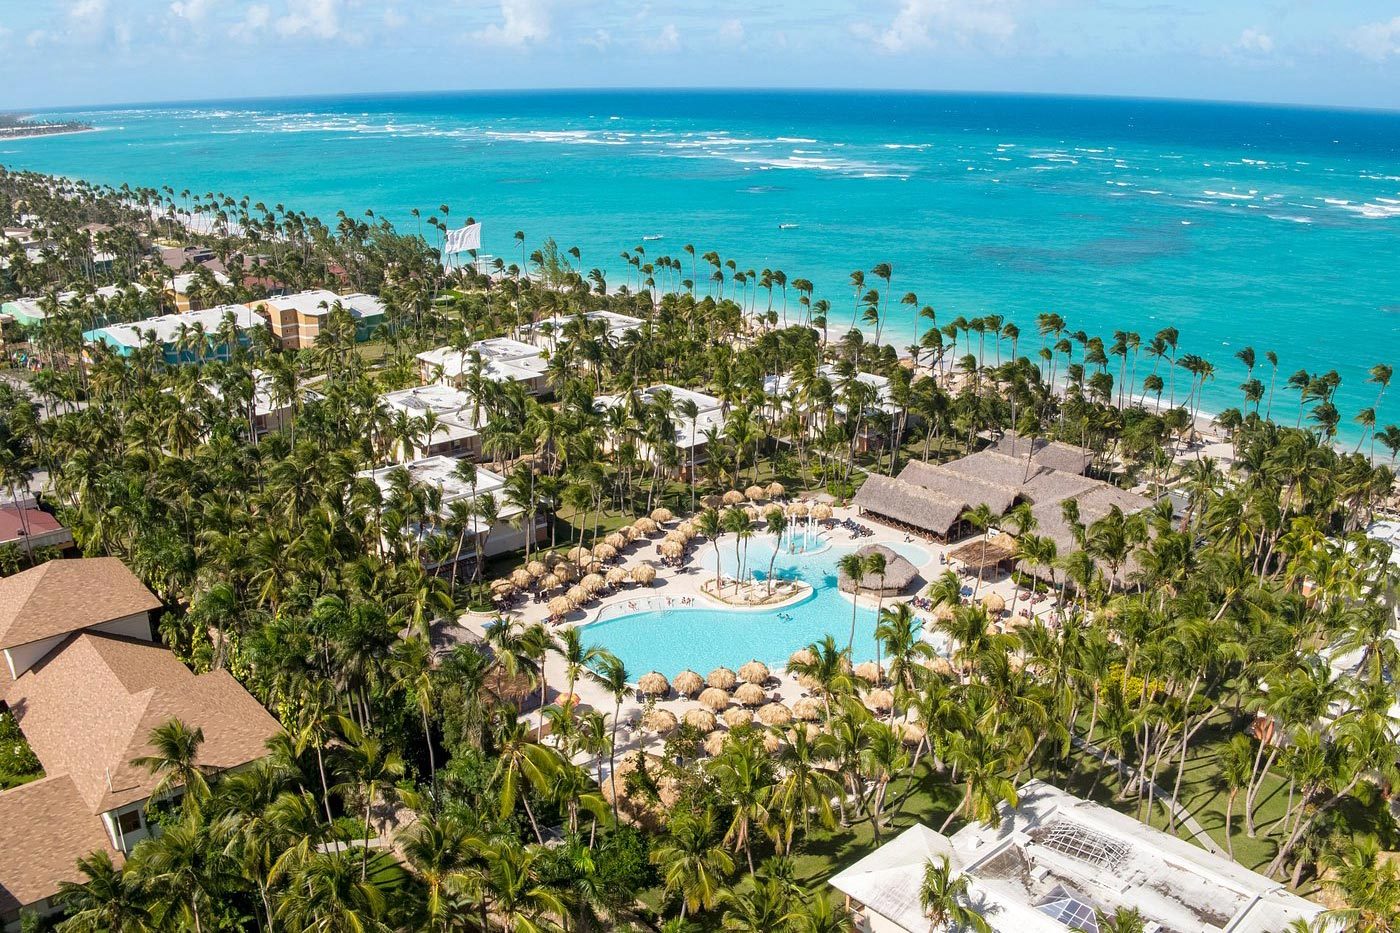 <h3>Grand Palladium Palace Resort & Spa, Dominican Republic</h3> <p>Part of the <a href="https://www.tripadvisor.com/Hotel_Review-g3176298-d283391-Reviews-Grand_Palladium_Palace_Resort_Spa_Casino-Bavaro_Punta_Cana_La_Altagracia_Province_Domi.html" rel="noopener noreferrer">Grand Palladium resort complex</a> on Bavaro Beach, this property is the one to choose if R&R is high on your priority list. While the services at Zentropia Palladium Spa & Wellness aren't included, as is the case with most resorts and hotels, they're all within steps of your room if you stay here. It's considered one of the most extensive spas in the Dominican Republic, with a jetted tub, Turkish bath, vapor bath, sauna and an extensive service menu that includes hair treatments, waxes, manis and pedis, facial and body treatments, exfoliation and a full gamut of massage styles.</p> <p>After or in between treatments, relax at any of this <a href="https://www.rd.com/list/best-spa-resorts-in-usa/">spa resort</a>'s six pools. They're all great, but we might recommend The Secret, an adults-only pool open until midnight. Looking to get some activity? Let the kids have their pirate ship (it's a feature of one of the pools, as are water slides)—if you want to ramp things up yourself, just go to the well-equipped fitness center attached to the spa.</p> <p><strong>Pros:</strong></p> <ul> <li>Elevated spa offering a wide variety of services</li> <li>Exchange privileges with adjacent Grand Palladium Bavaro Suites Resort and Grand Palladium Punta Cana Resort & Spa</li> <li>Adults-only The Secret pool</li> <li>No reservations required for dining</li> </ul> <p><strong>Cons:</strong></p> <ul> <li>Additional charge for room service</li> <li>Reservations are required</li> </ul> <p class="listicle-page__cta-button-shop"><a class="shop-btn" href="https://www.tripadvisor.com/Hotel_Review-g3176298-d283391-Reviews-Grand_Palladium_Palace_Resort_Spa_Casino-Bavaro_Punta_Cana_La_Altagracia_Province_Domi.html">Book Now</a></p>